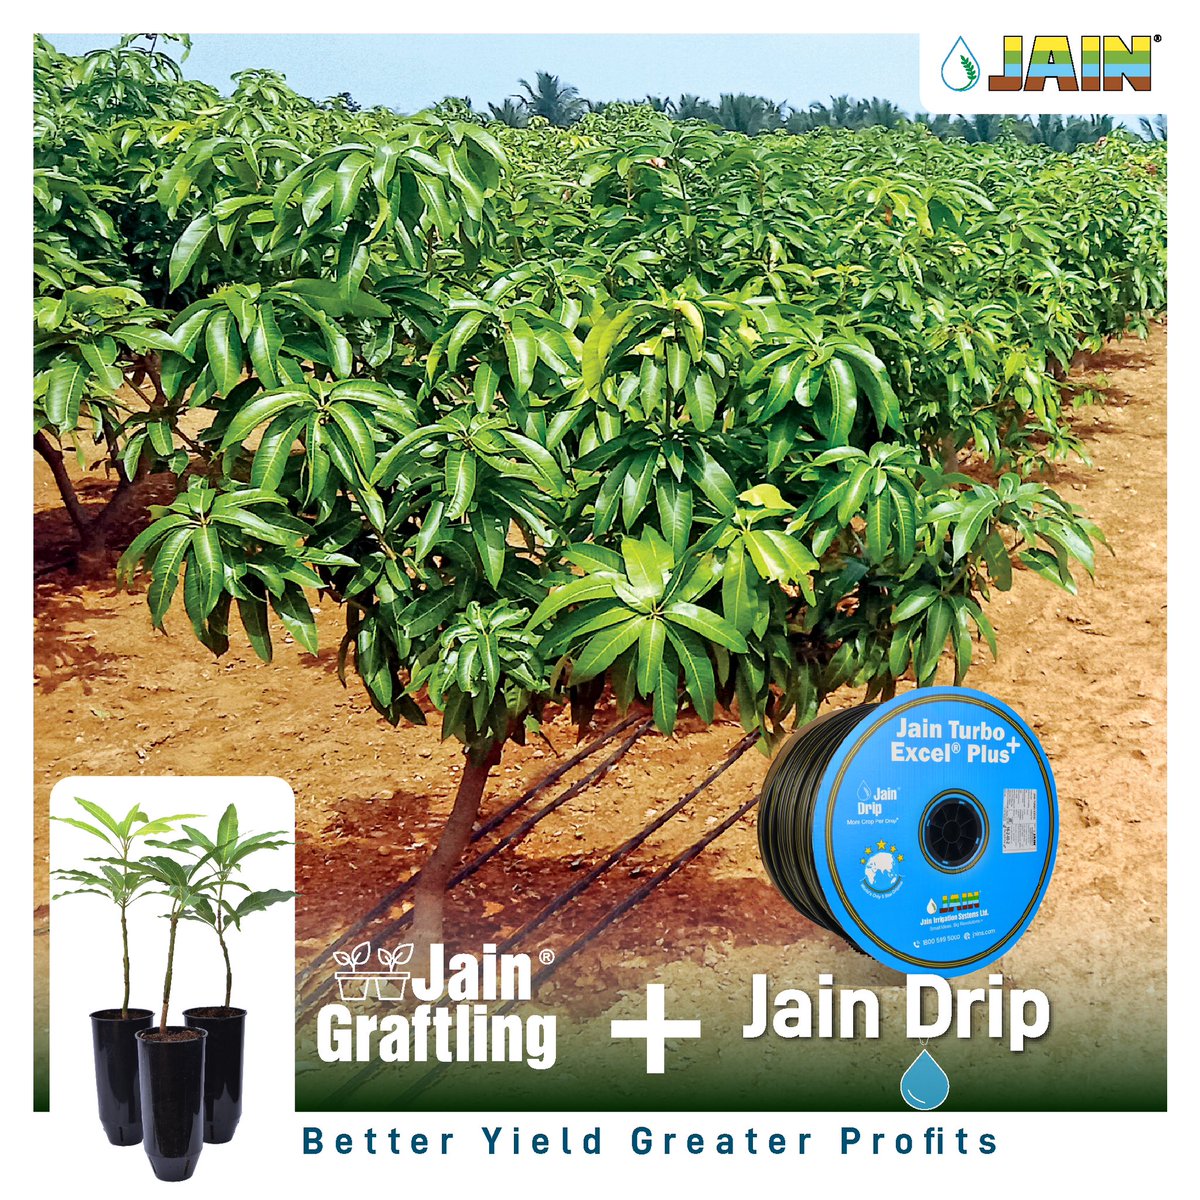 Thrive with precision: Jain Mango Graftling and Jain Dripline—a match made for maximum yield! 🥭 💧 

Cultivate success and sustainability in every drop with #JainIrrigation 💯

#MangoFarming #FarmingTips #AgTech #Agri #JainIrrigation #JainDrip #JainGraftling #JISL